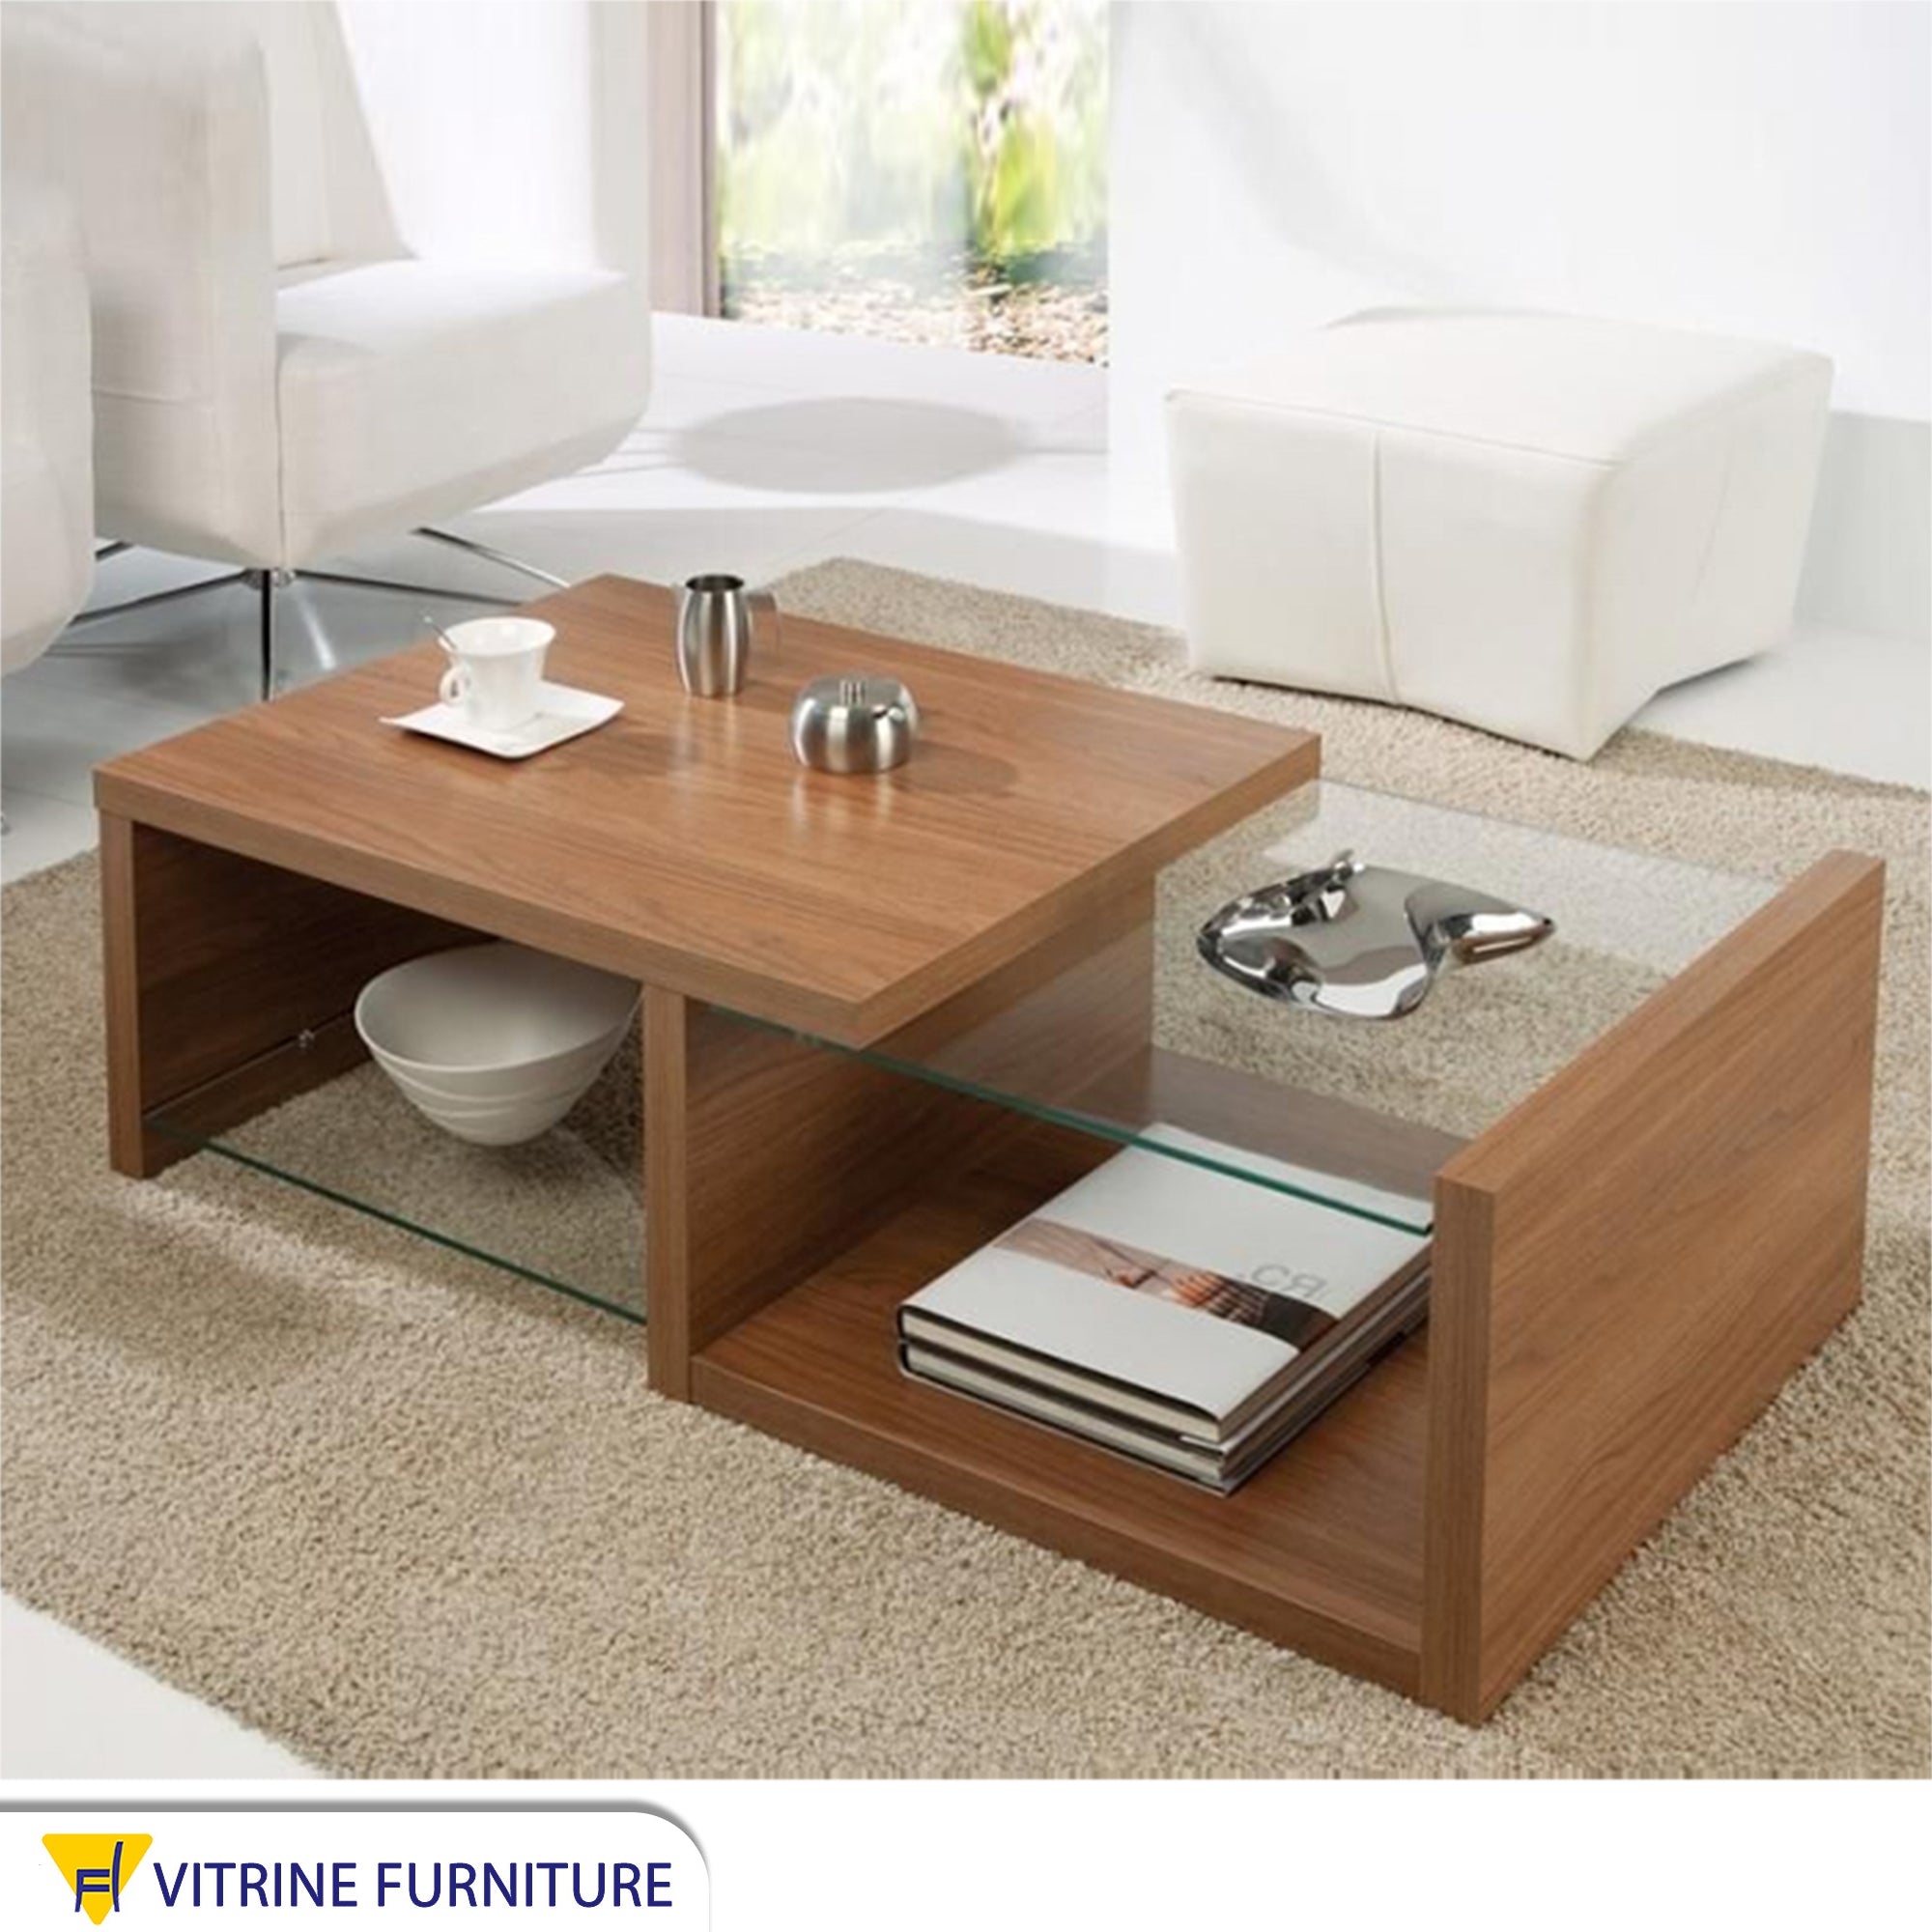 Living room coffee table in wooden color